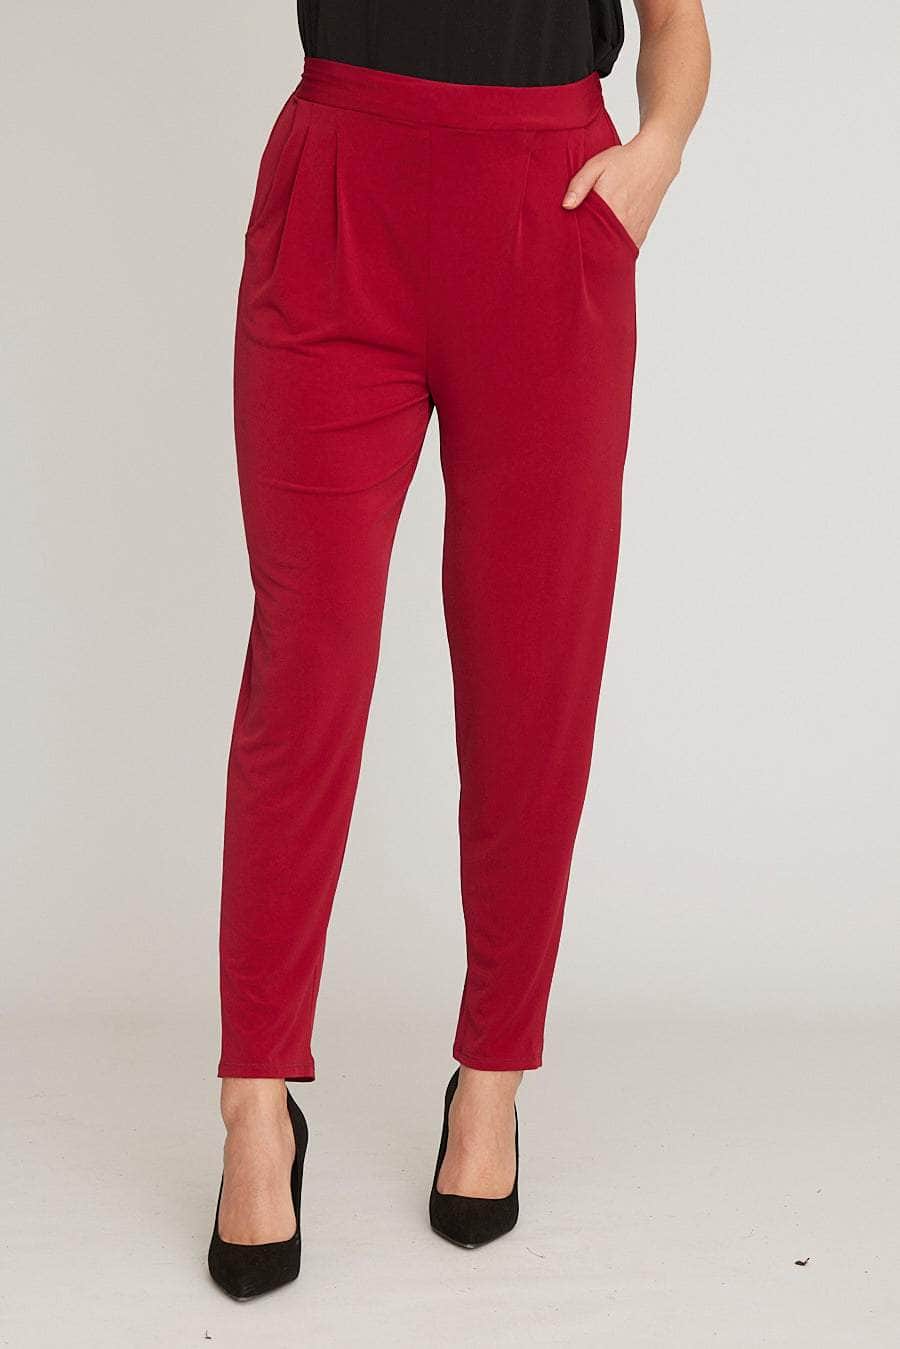 R2 Trousers Maroon / UK: 12 - EU: 38 - US: S Essential Tapered Trousers with Pockets